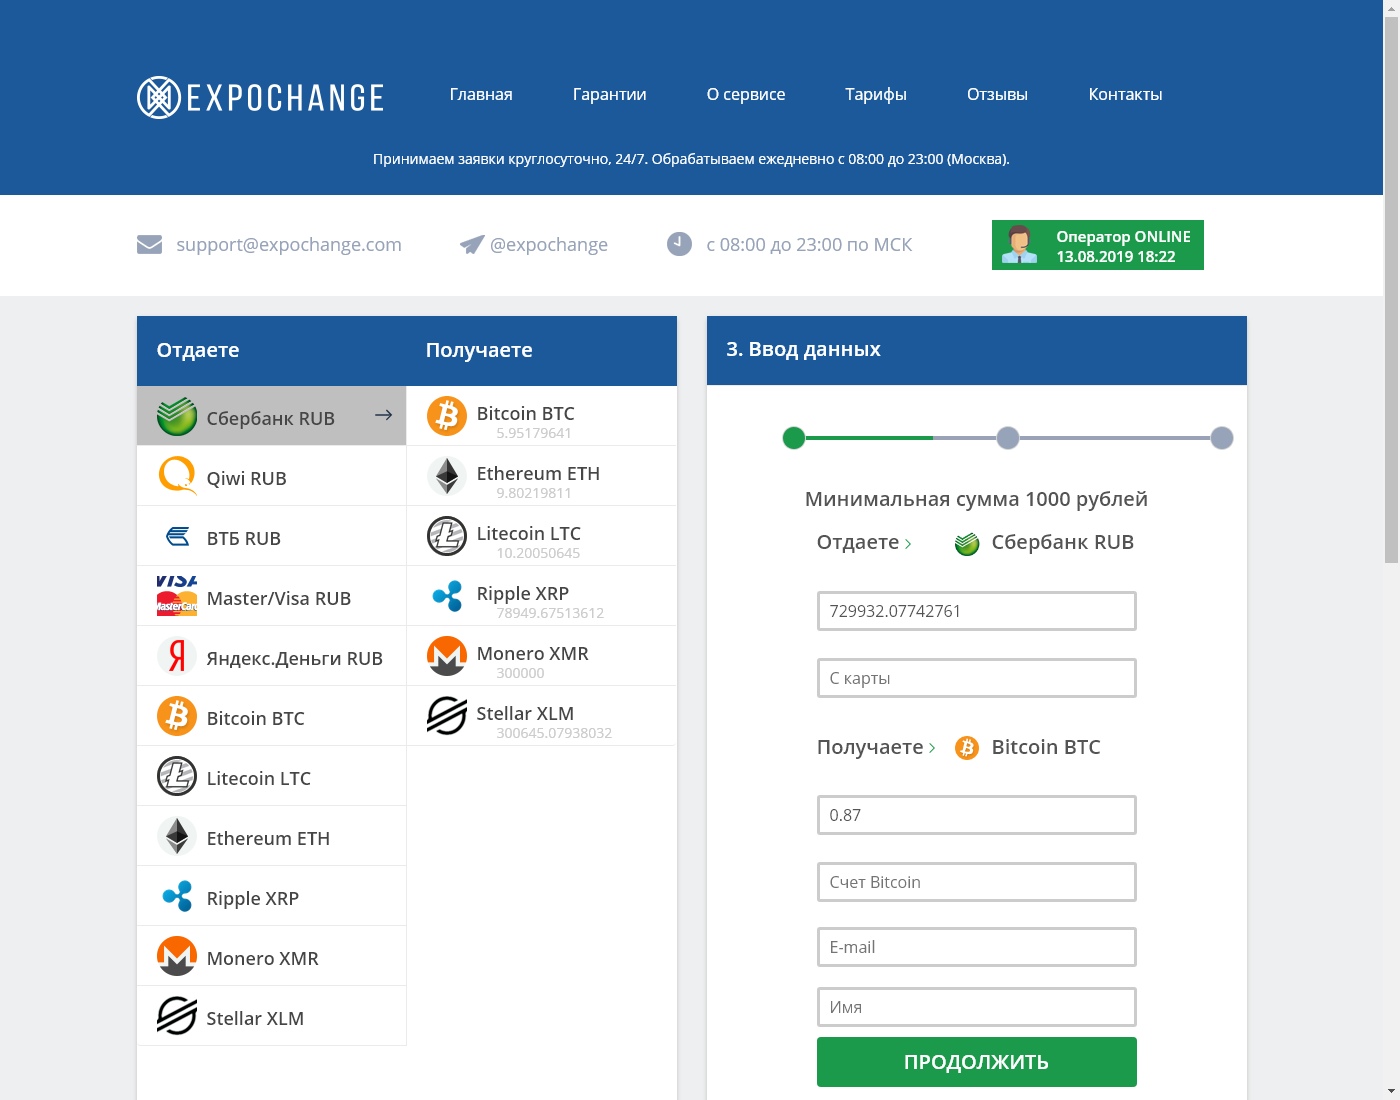 expochange user interface: the home page in English